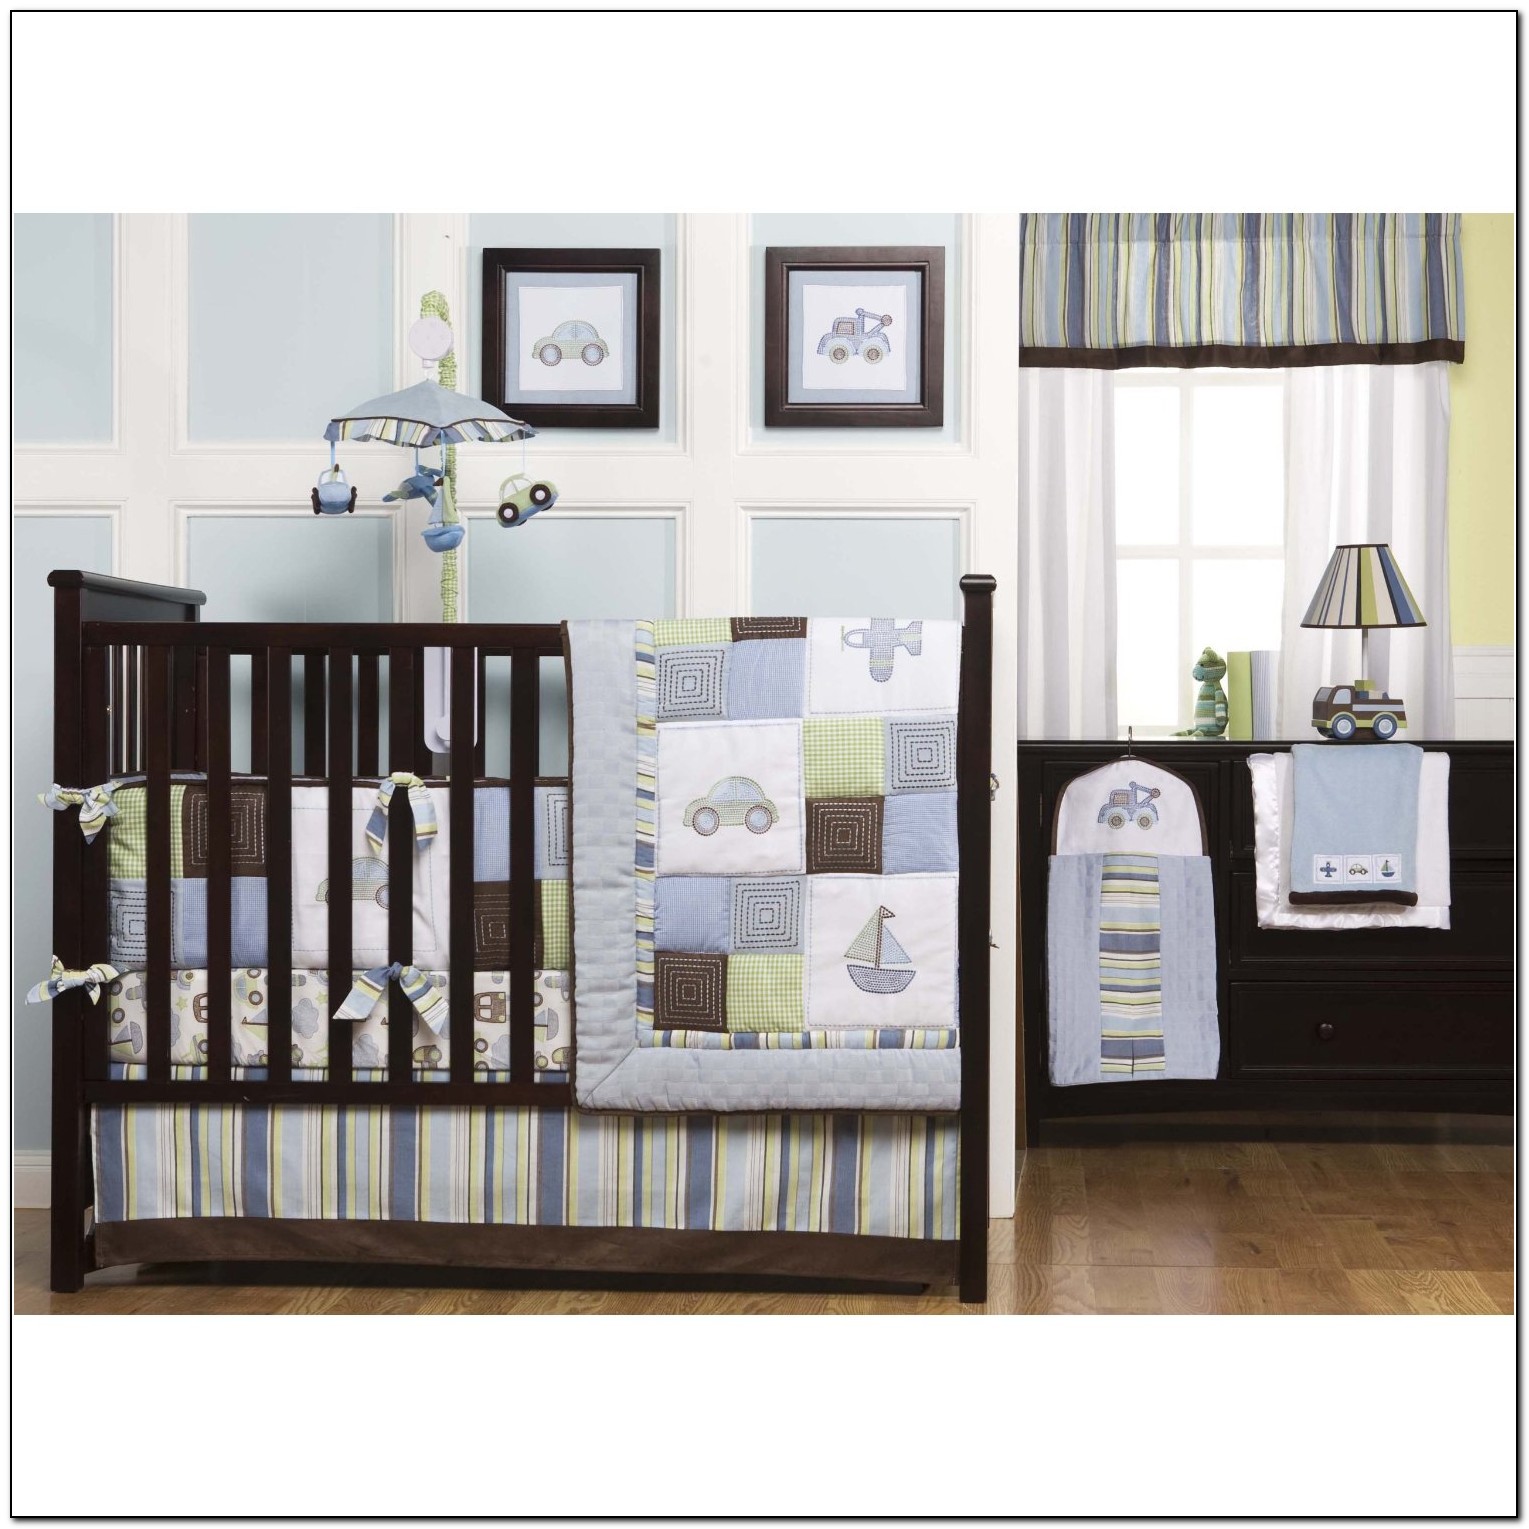 Nursery Bedding Sets For Boys - Beds : Home Design Ideas #8yQROOaPgr5963